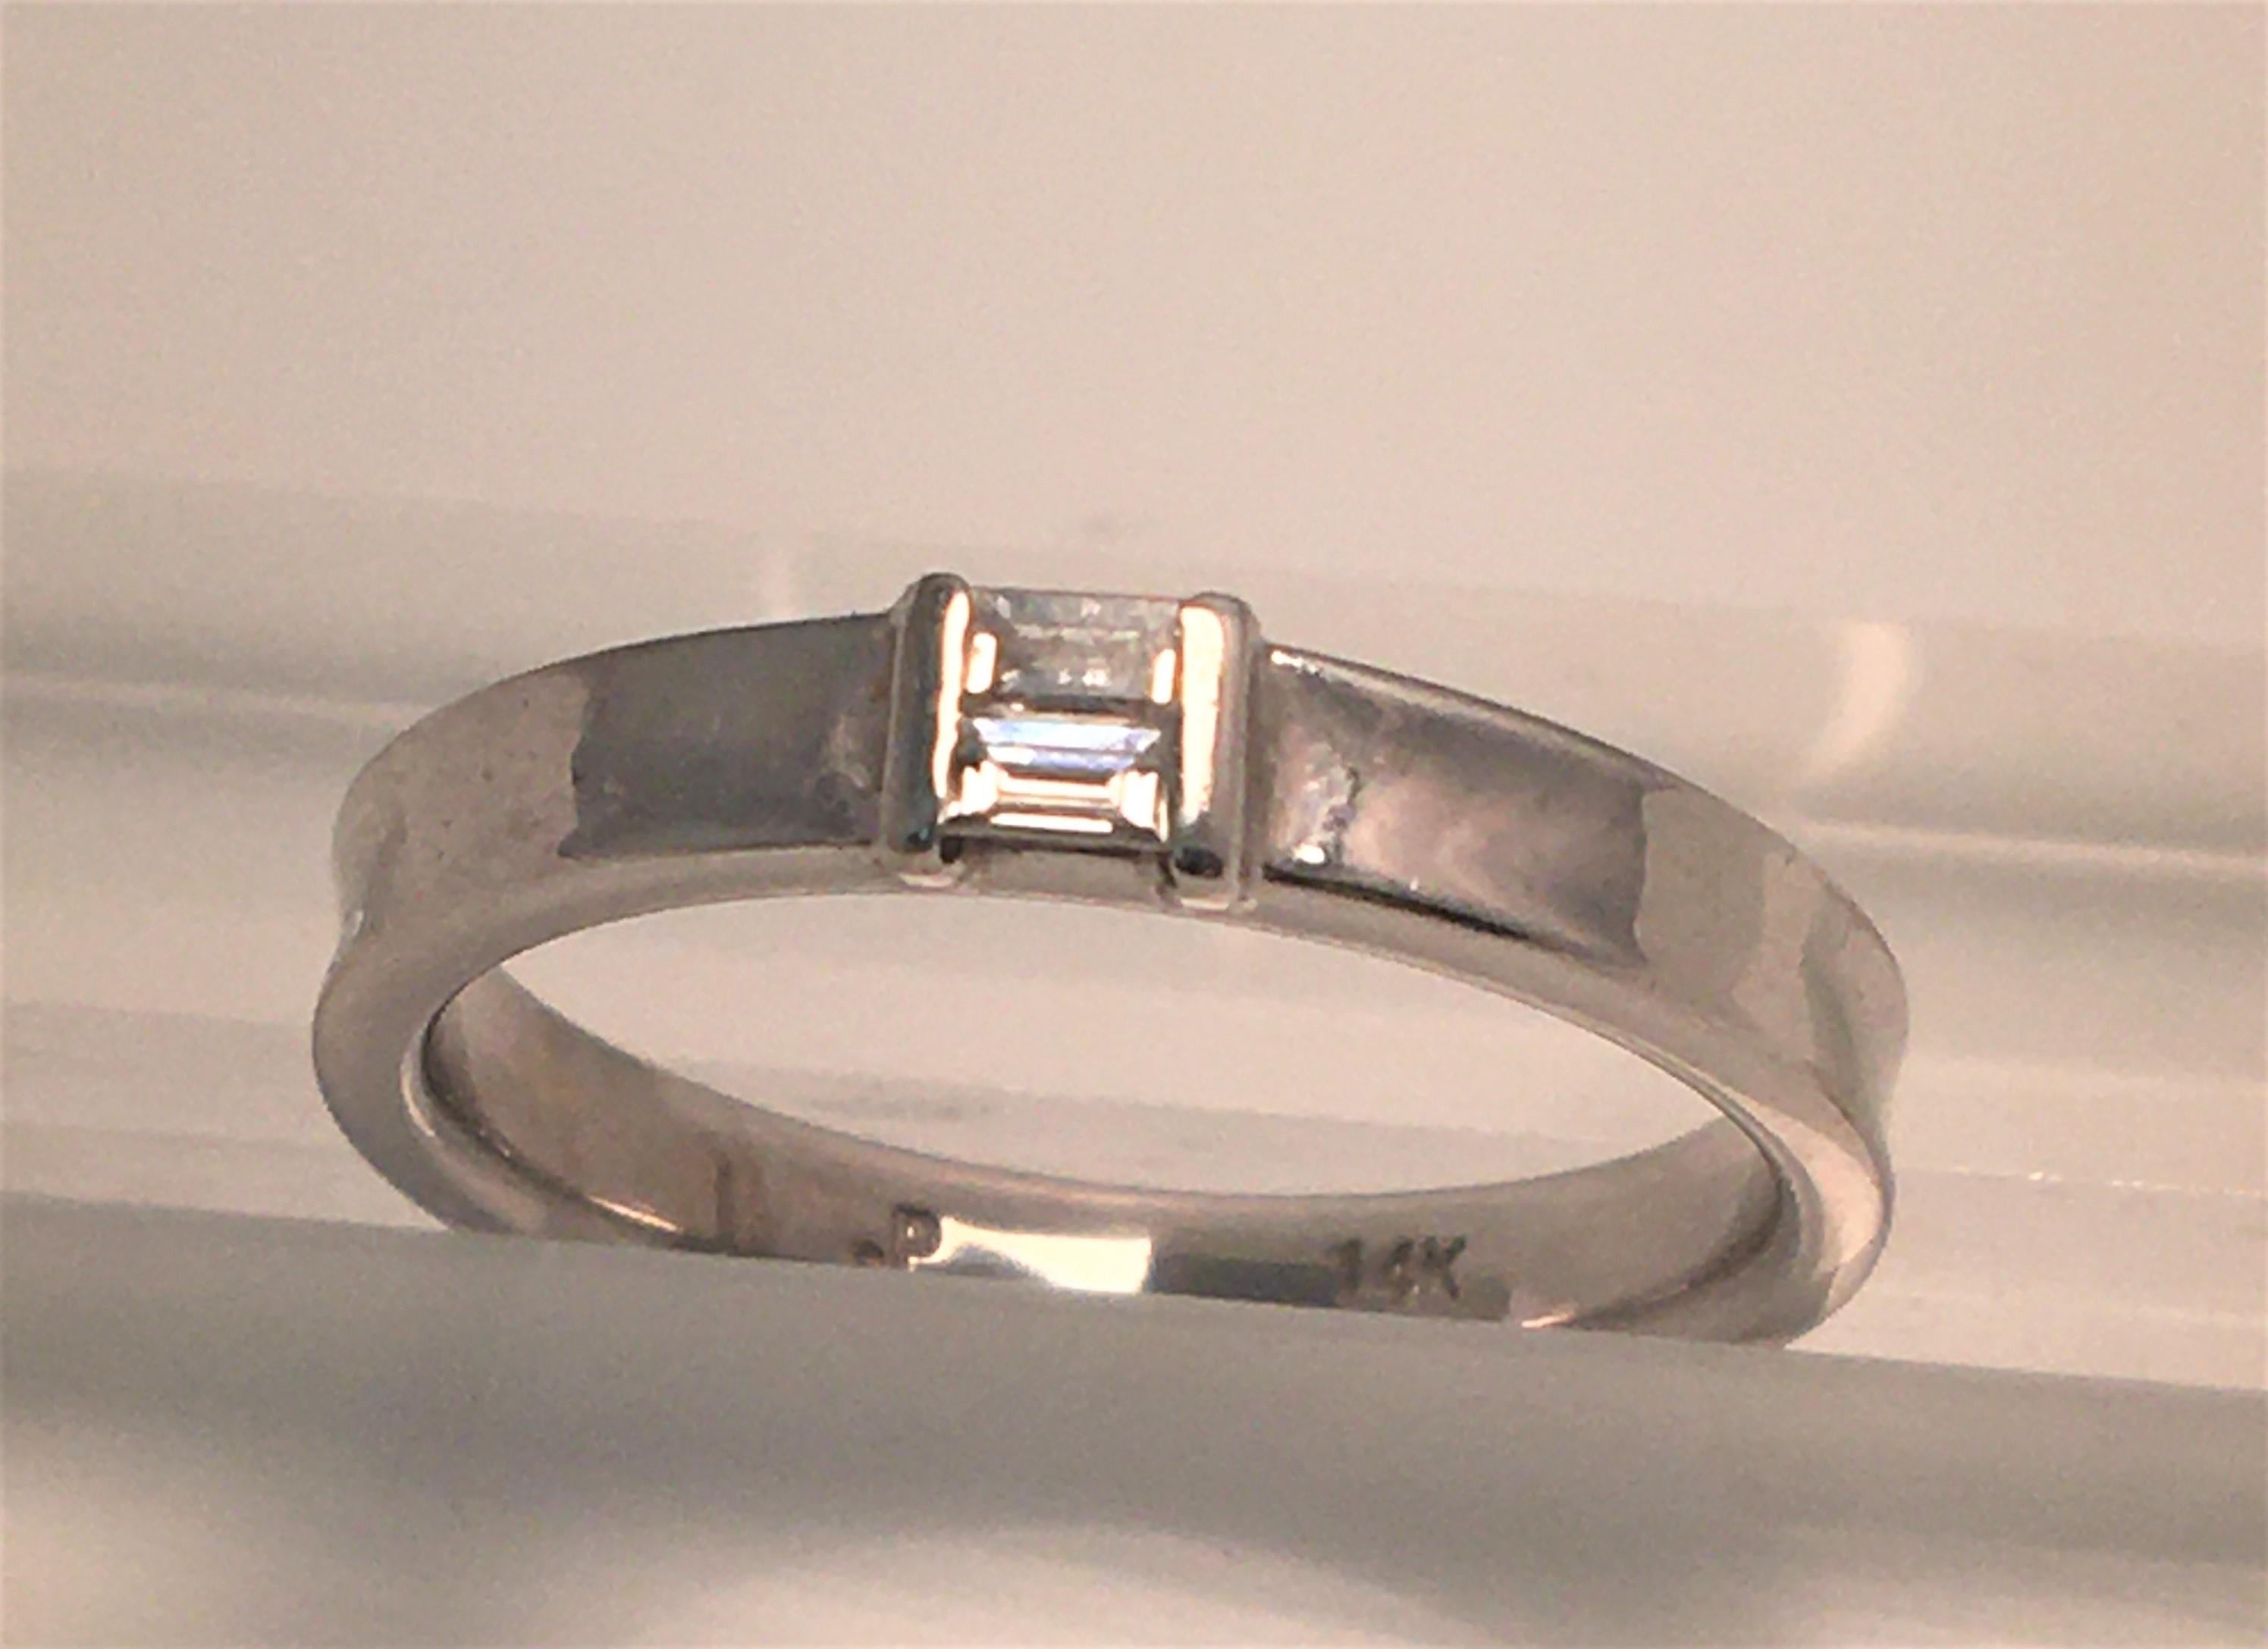 By designer Paolo, known for his modern designs
14 karat white gold band, approximately 3mm wide all the way around, concave
2 baguette diamonds approximately .08 tdw, G-H color, SI clarity
Size 5
Stamped 